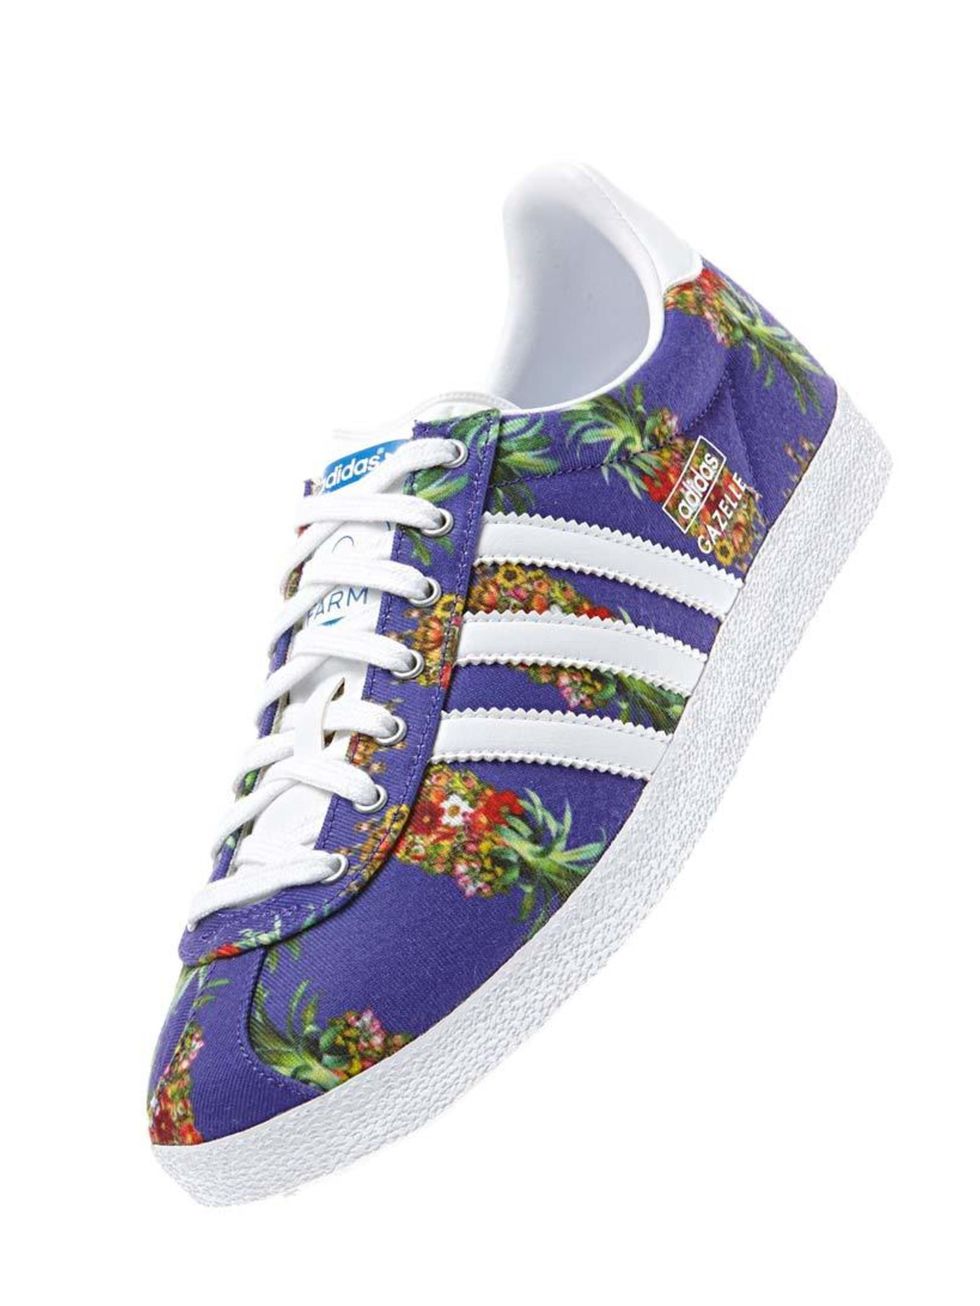 <p>Inject some brazilian spirit .. One of the coolest collaborations this year.. Adidas Originals x Farm. </p><p>Gazelle OG Trainers £67 by <a href="http://www.adidas.co.uk/gazelle-og-shoes/D67721_550.html">Adidas</a></p>